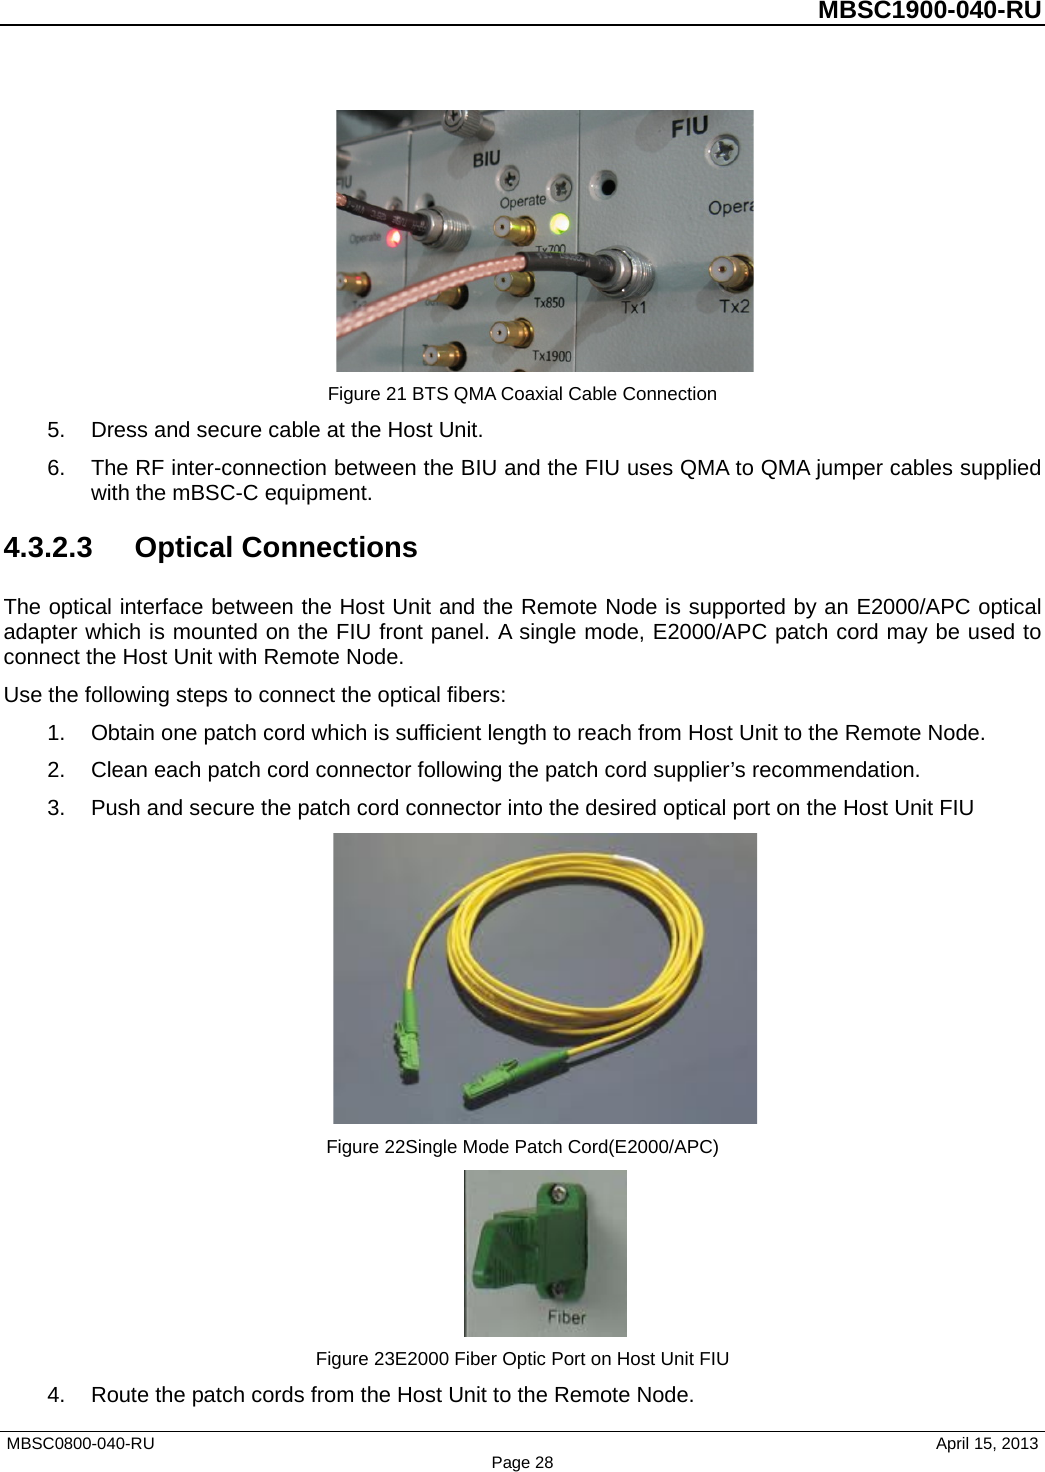          MBSC1900-040-RU    Figure 21 BTS QMA Coaxial Cable Connection 5. Dress and secure cable at the Host Unit. 6. The RF inter-connection between the BIU and the FIU uses QMA to QMA jumper cables supplied with the mBSC-C equipment. 4.3.2.3 Optical Connections The optical interface between the Host Unit and the Remote Node is supported by an E2000/APC optical adapter which is mounted on the FIU front panel. A single mode, E2000/APC patch cord may be used to connect the Host Unit with Remote Node. Use the following steps to connect the optical fibers: 1. Obtain one patch cord which is sufficient length to reach from Host Unit to the Remote Node. 2. Clean each patch cord connector following the patch cord supplier’s recommendation. 3. Push and secure the patch cord connector into the desired optical port on the Host Unit FIU  Figure 22Single Mode Patch Cord(E2000/APC)  Figure 23E2000 Fiber Optic Port on Host Unit FIU 4. Route the patch cords from the Host Unit to the Remote Node. MBSC0800-040-RU                                      April 15, 2013 Page 28 